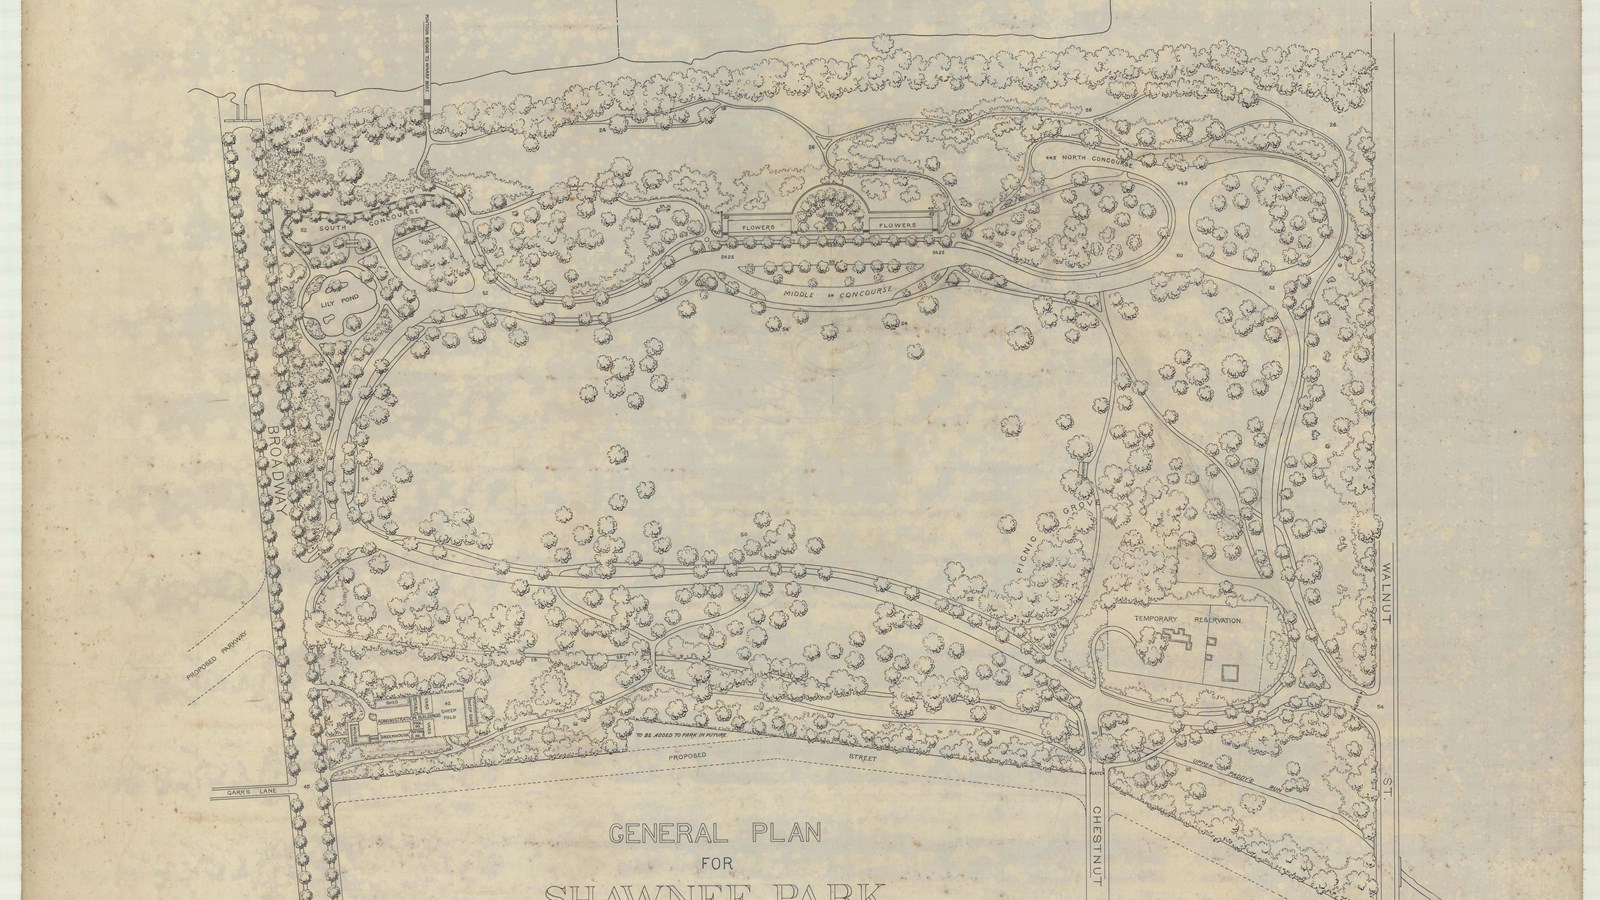 Plan of rectangular park with curving paths and a park filled with trees, but one open space